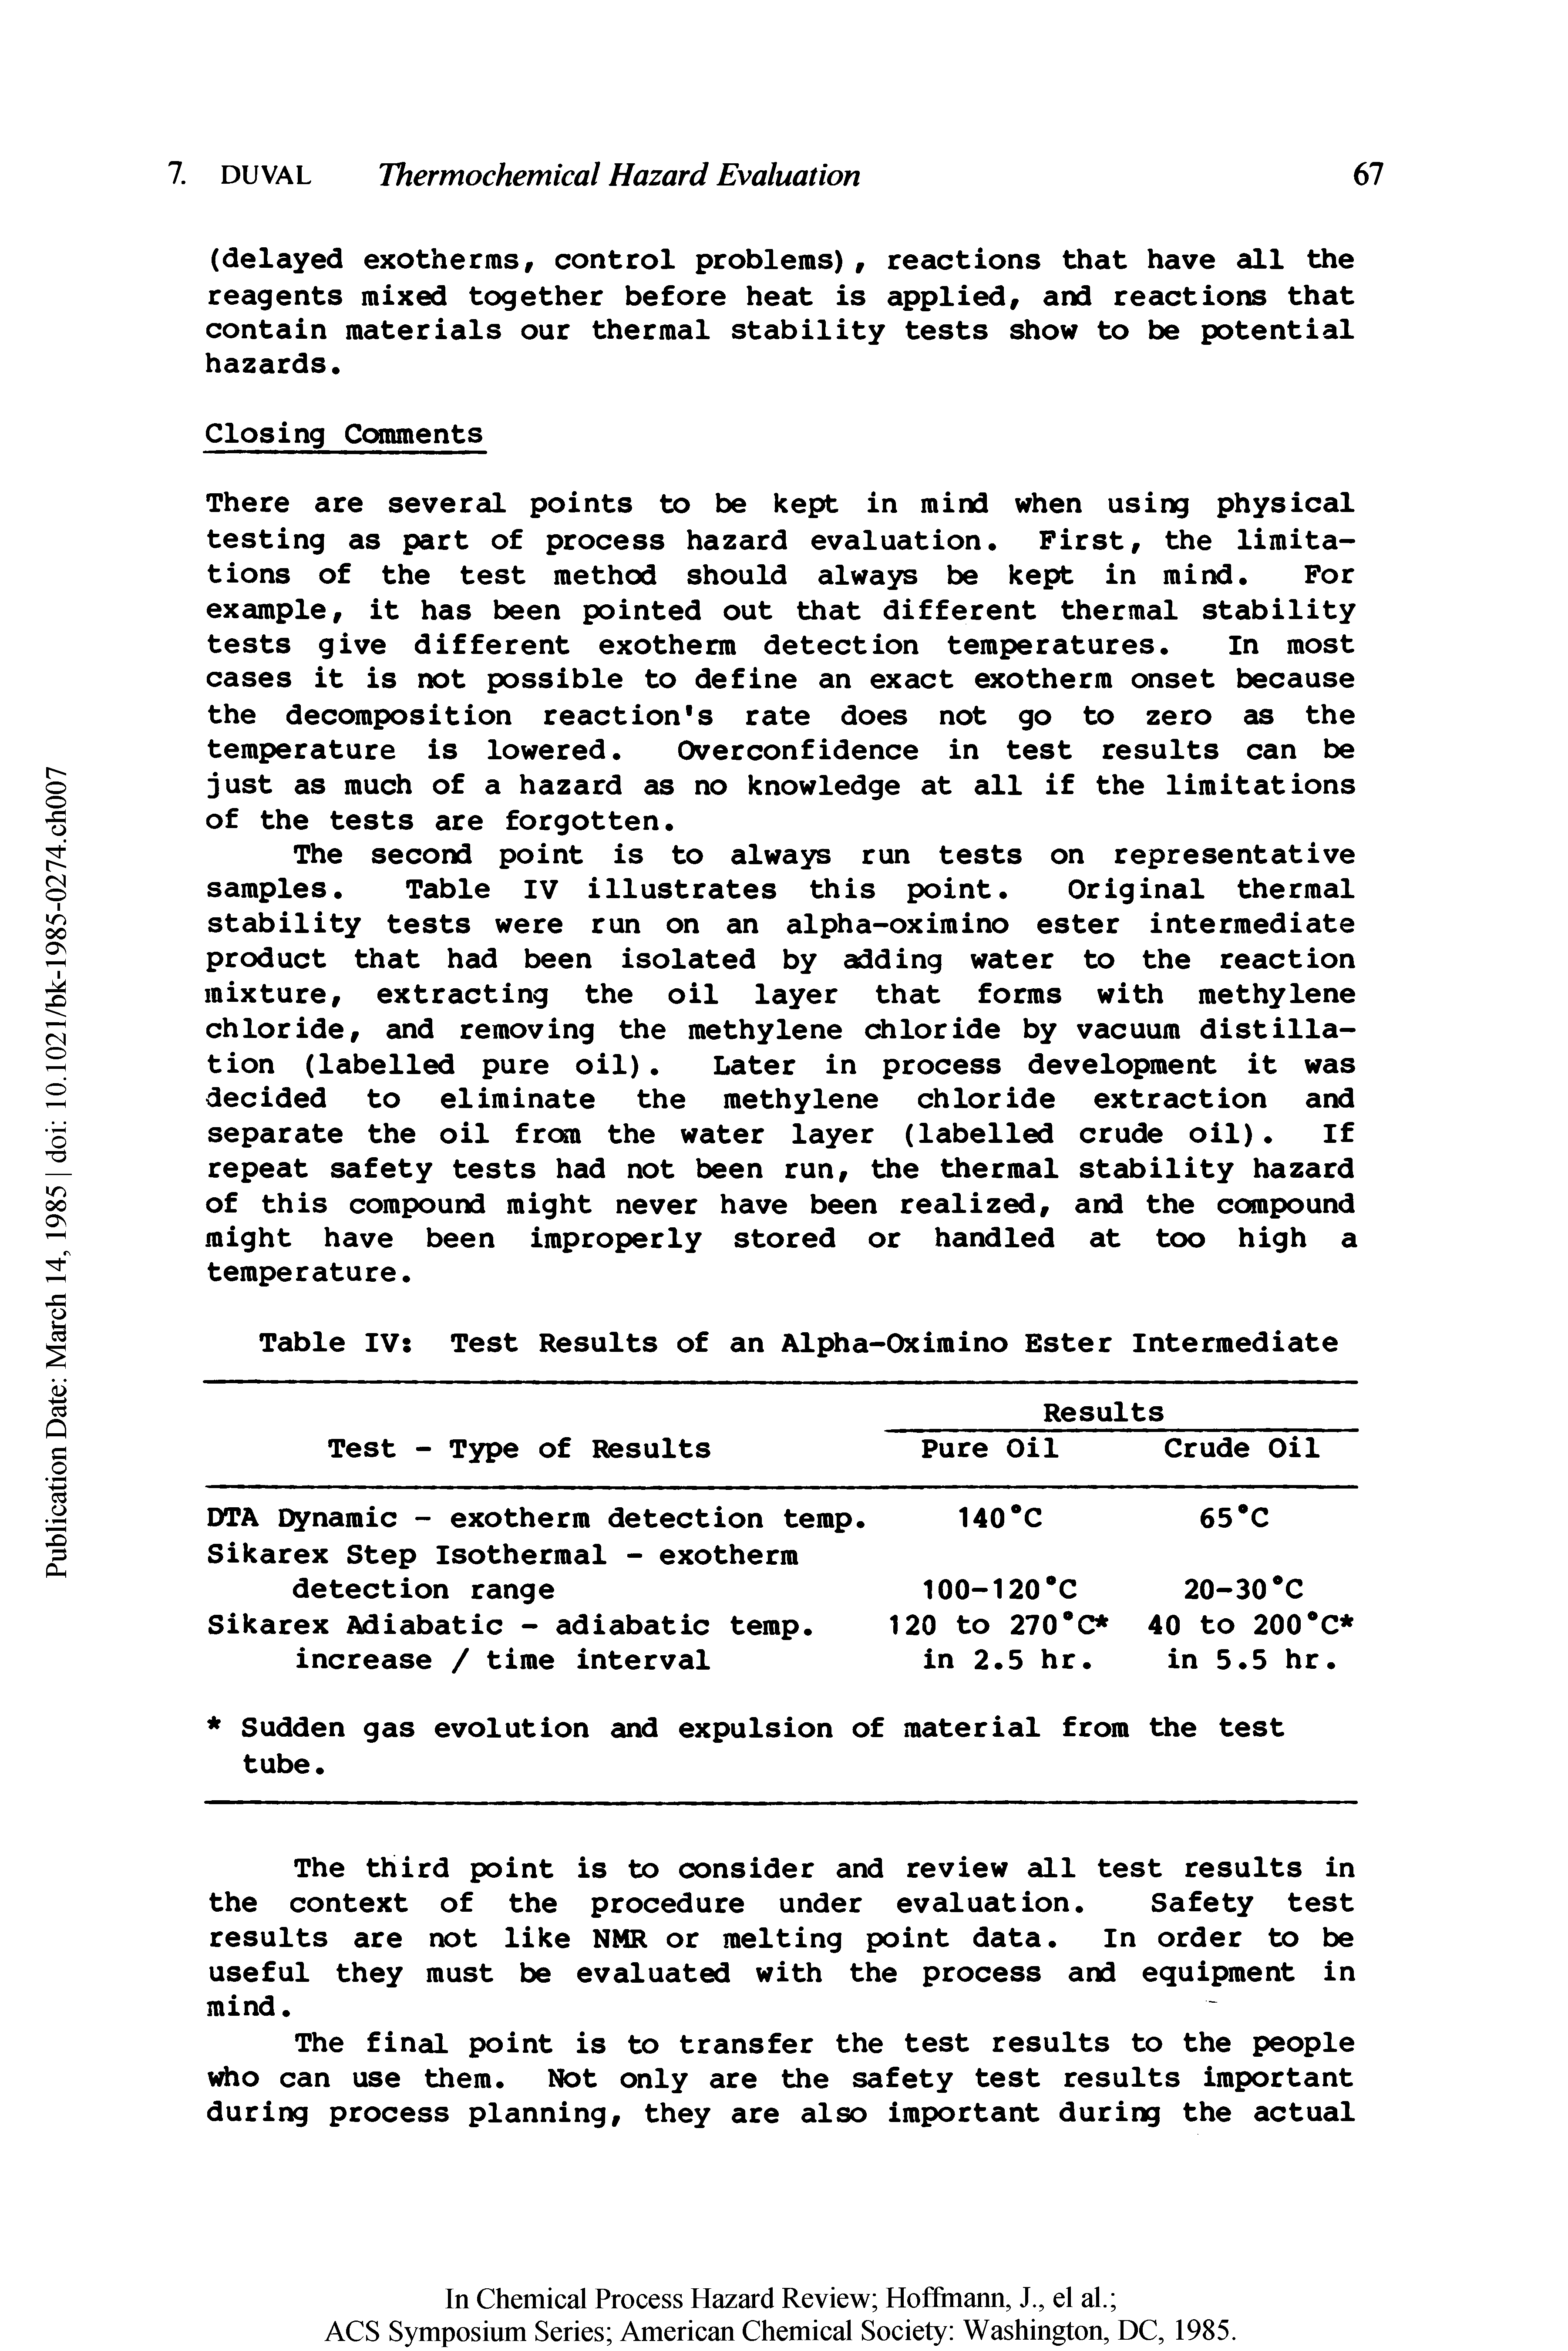 Table IV Test Results of an Alpha-Oximino Ester Intermediate...